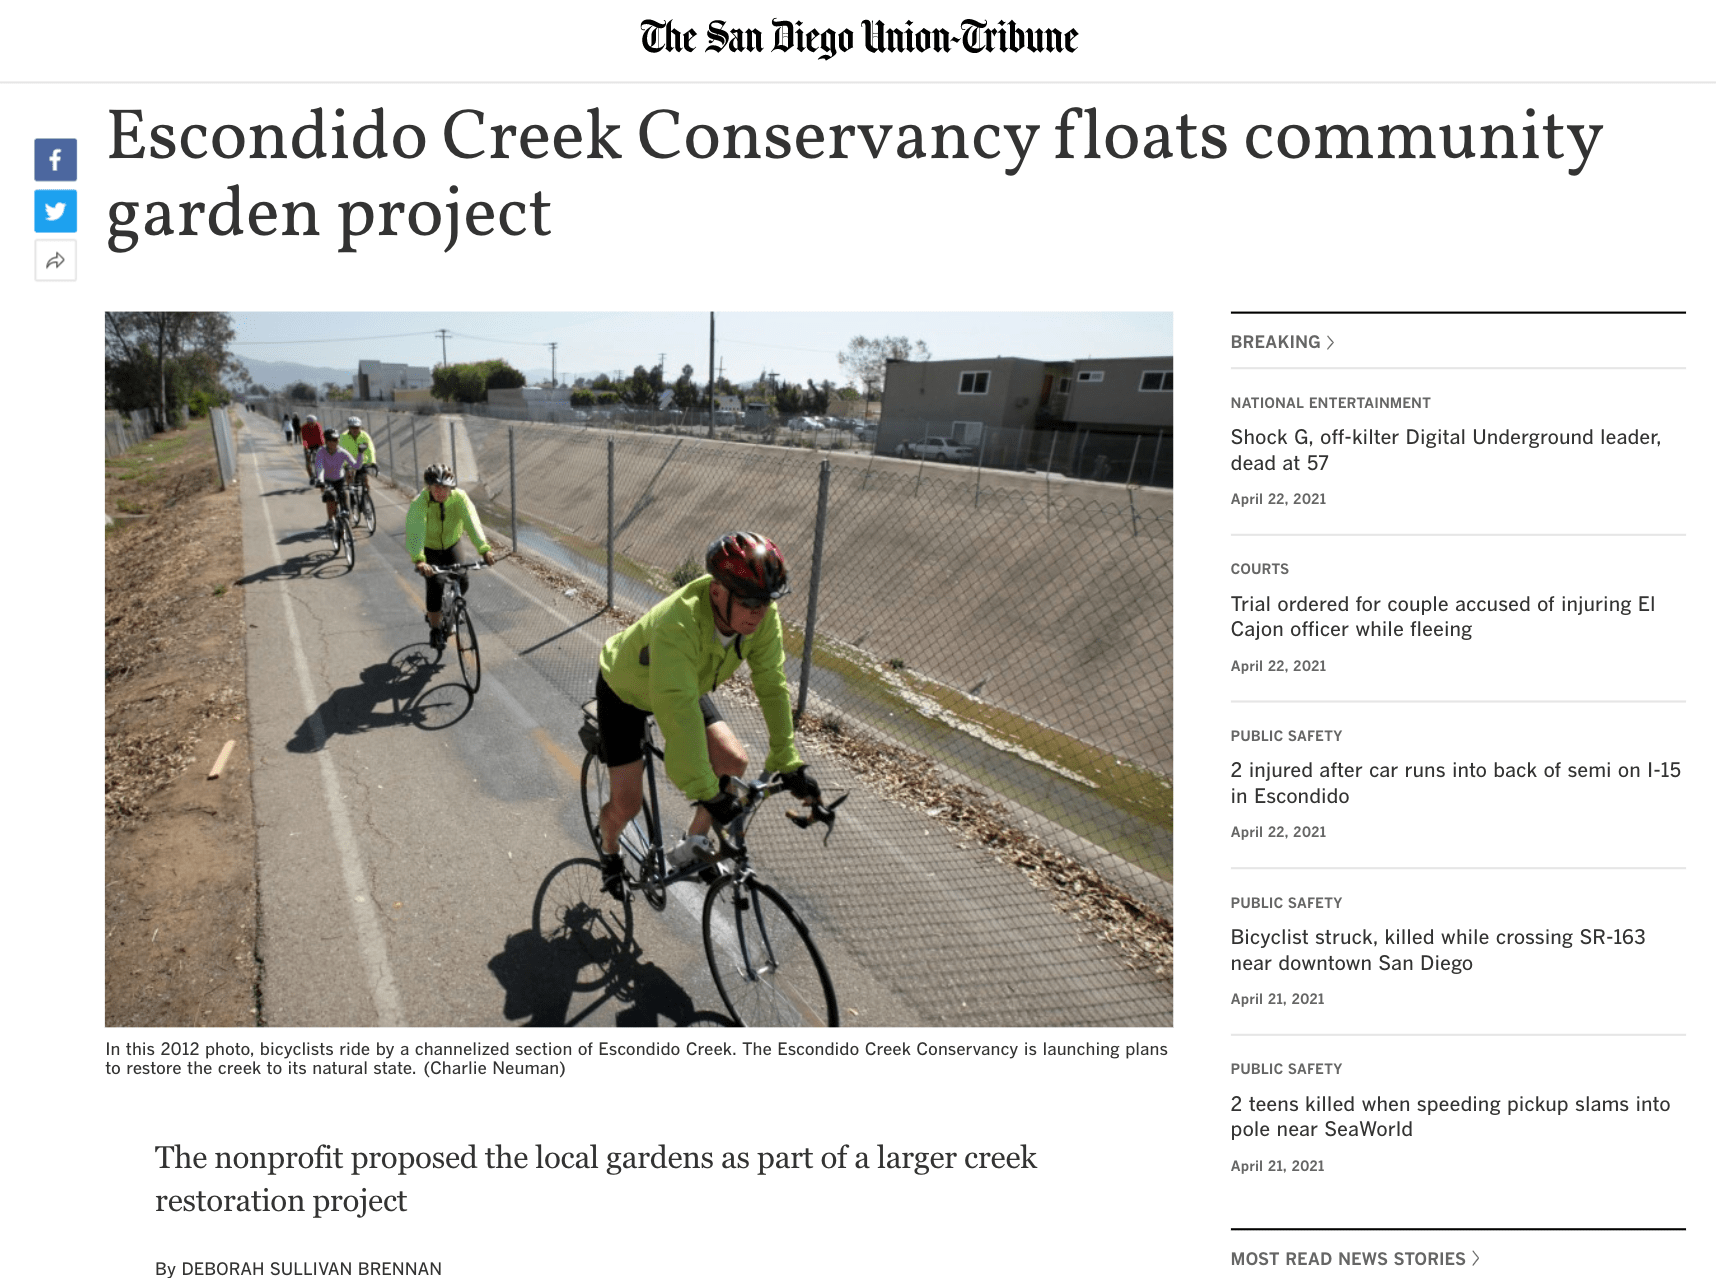 An Image of a news article about proposed public gardens along the Escondido Creek in the San Diego Union Tribune.